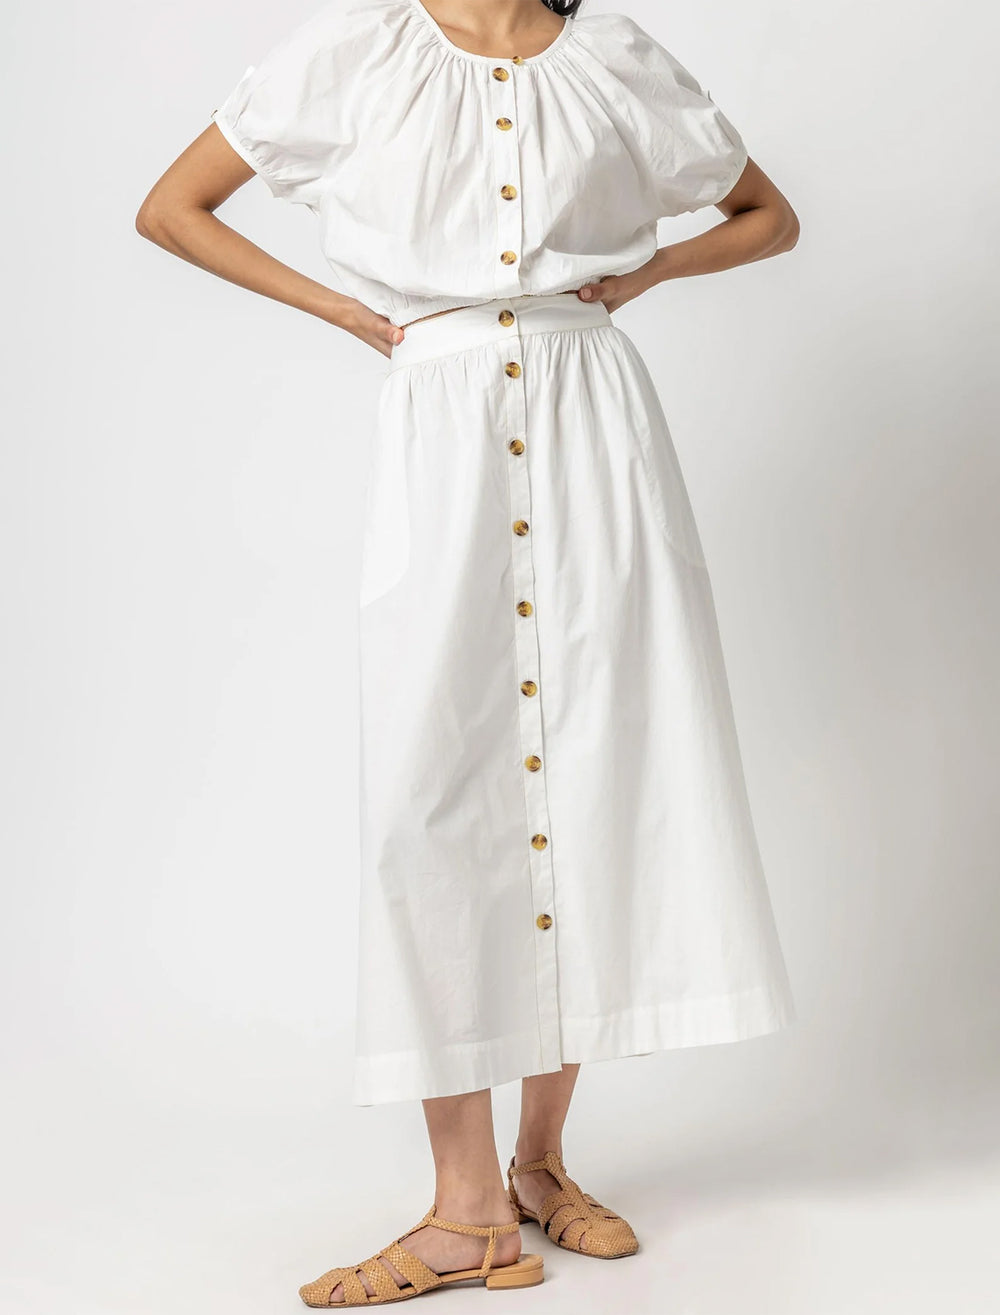 Model wearing Lilla P.'s button front long skirt in white.